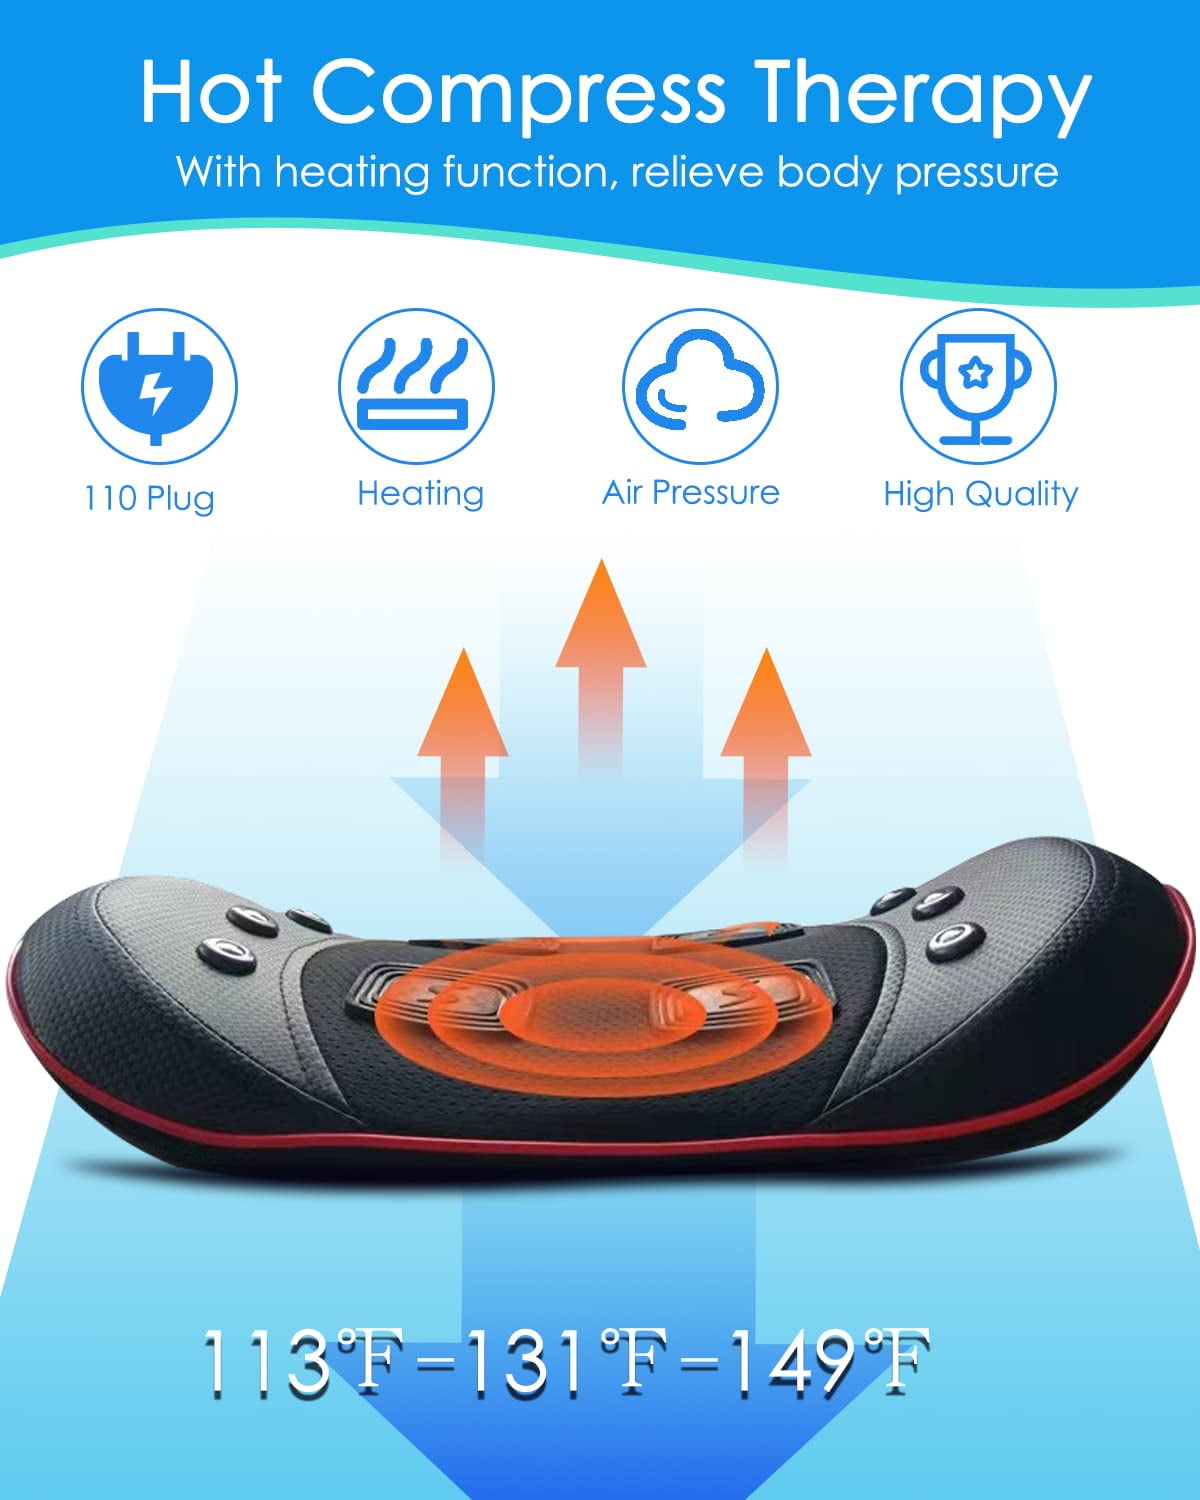 Electric Lumbar Traction Device Massager with Heat Function & Adjustable  Intensity,Electric Inflatable Back Stretcher Device,Back & Sciatica Pain  Relief Relaxation, Ideal Gifts